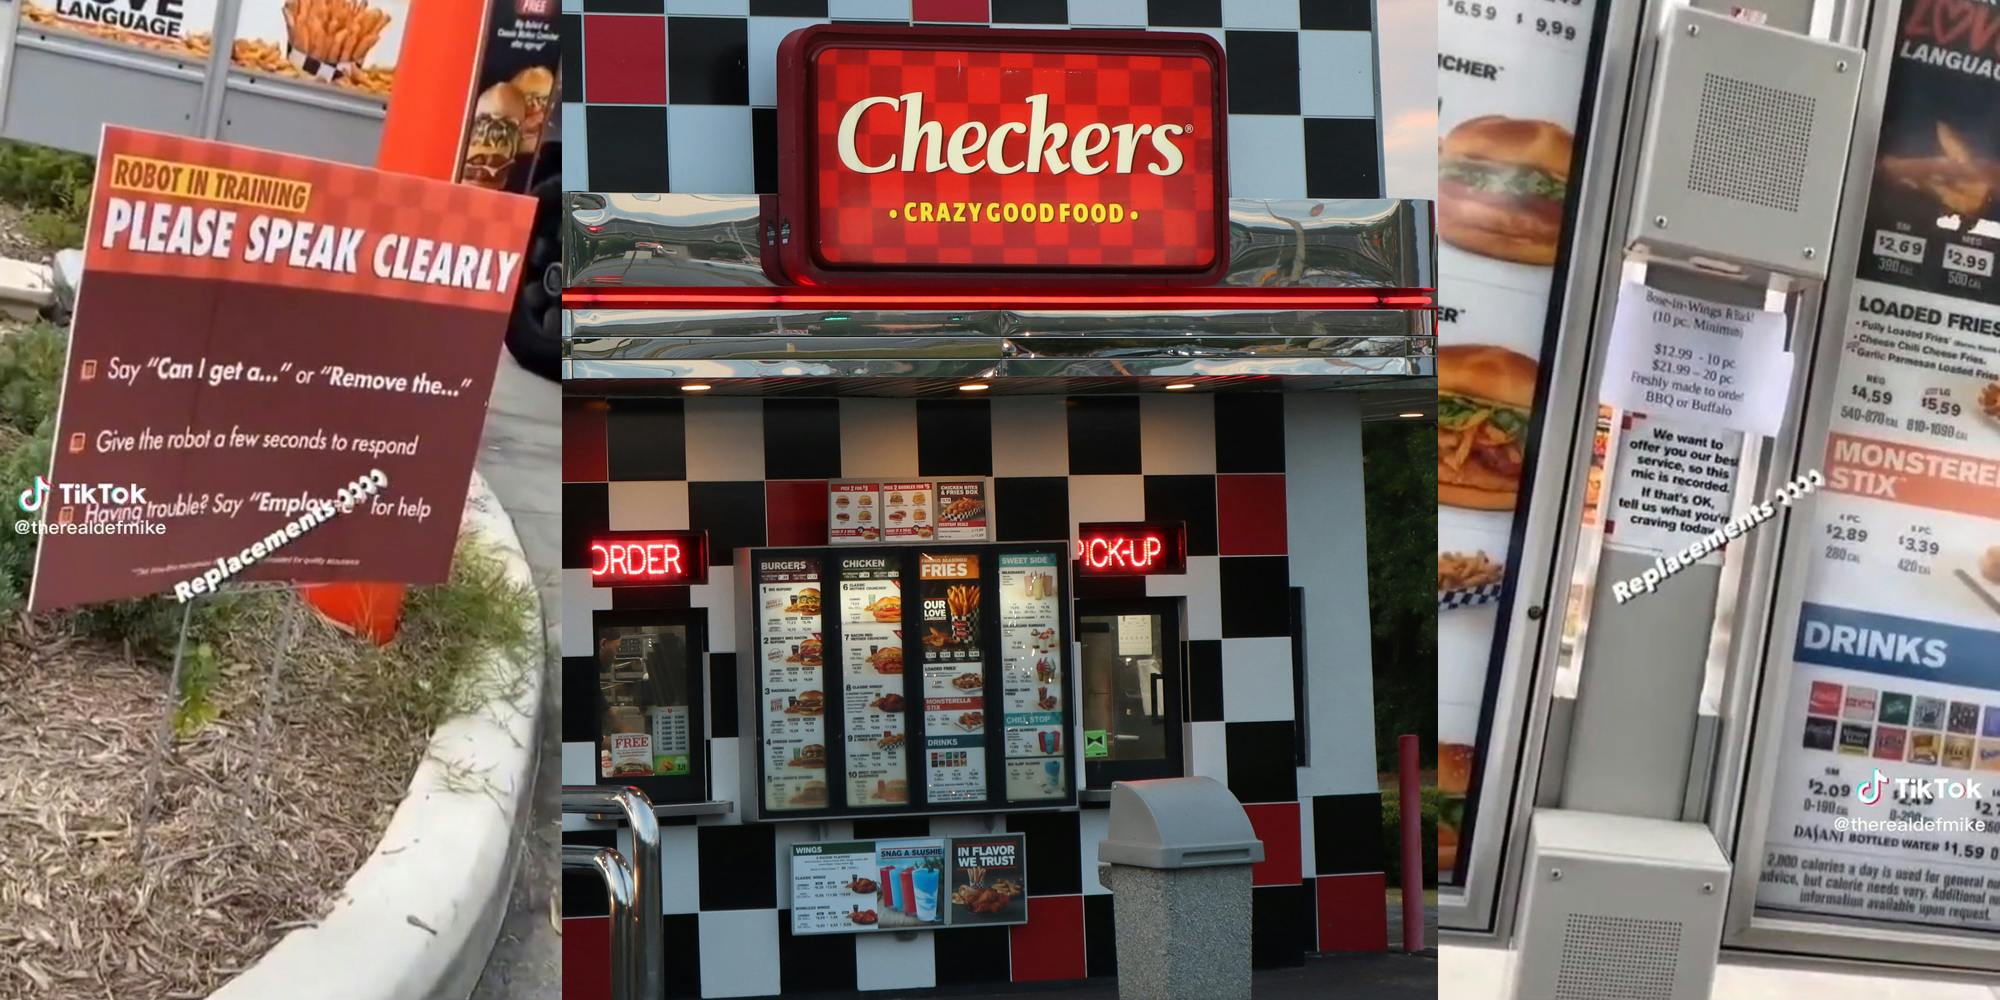 Customer Asked To ‘Speak Clearly’ To Checkers Drive-Thru Robot